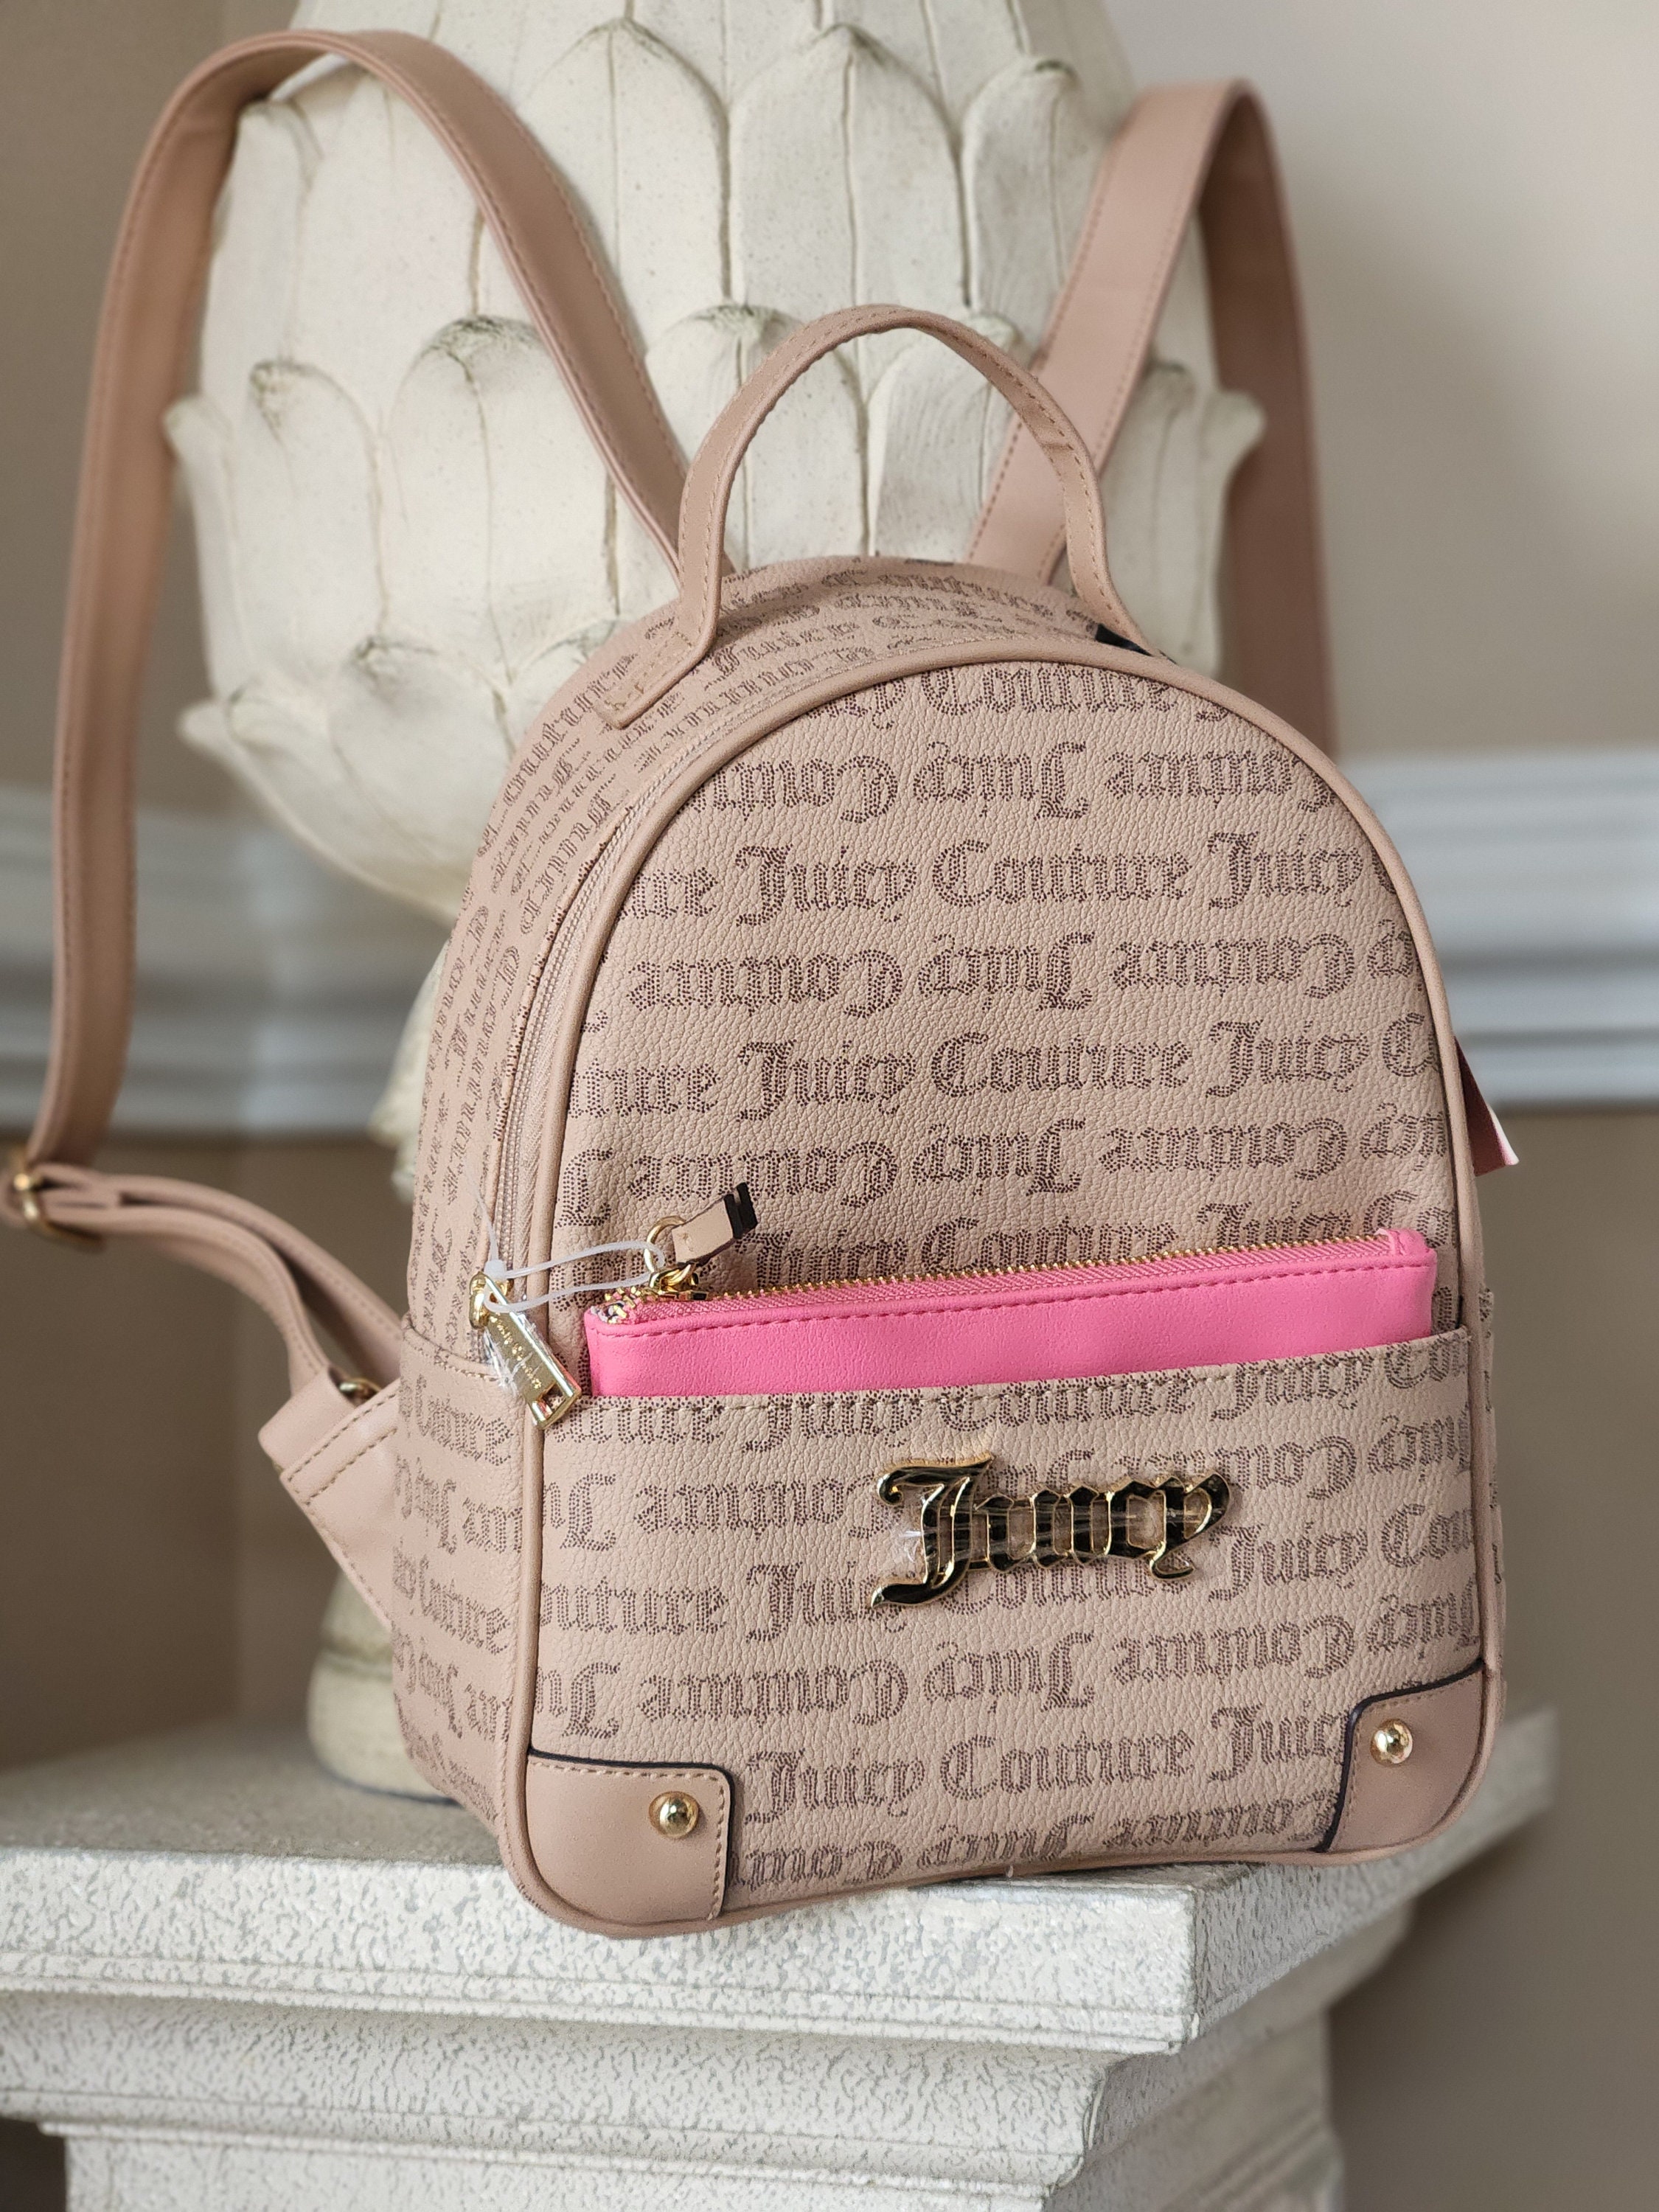 black juicy couture backpack by jkfangirl on DeviantArt